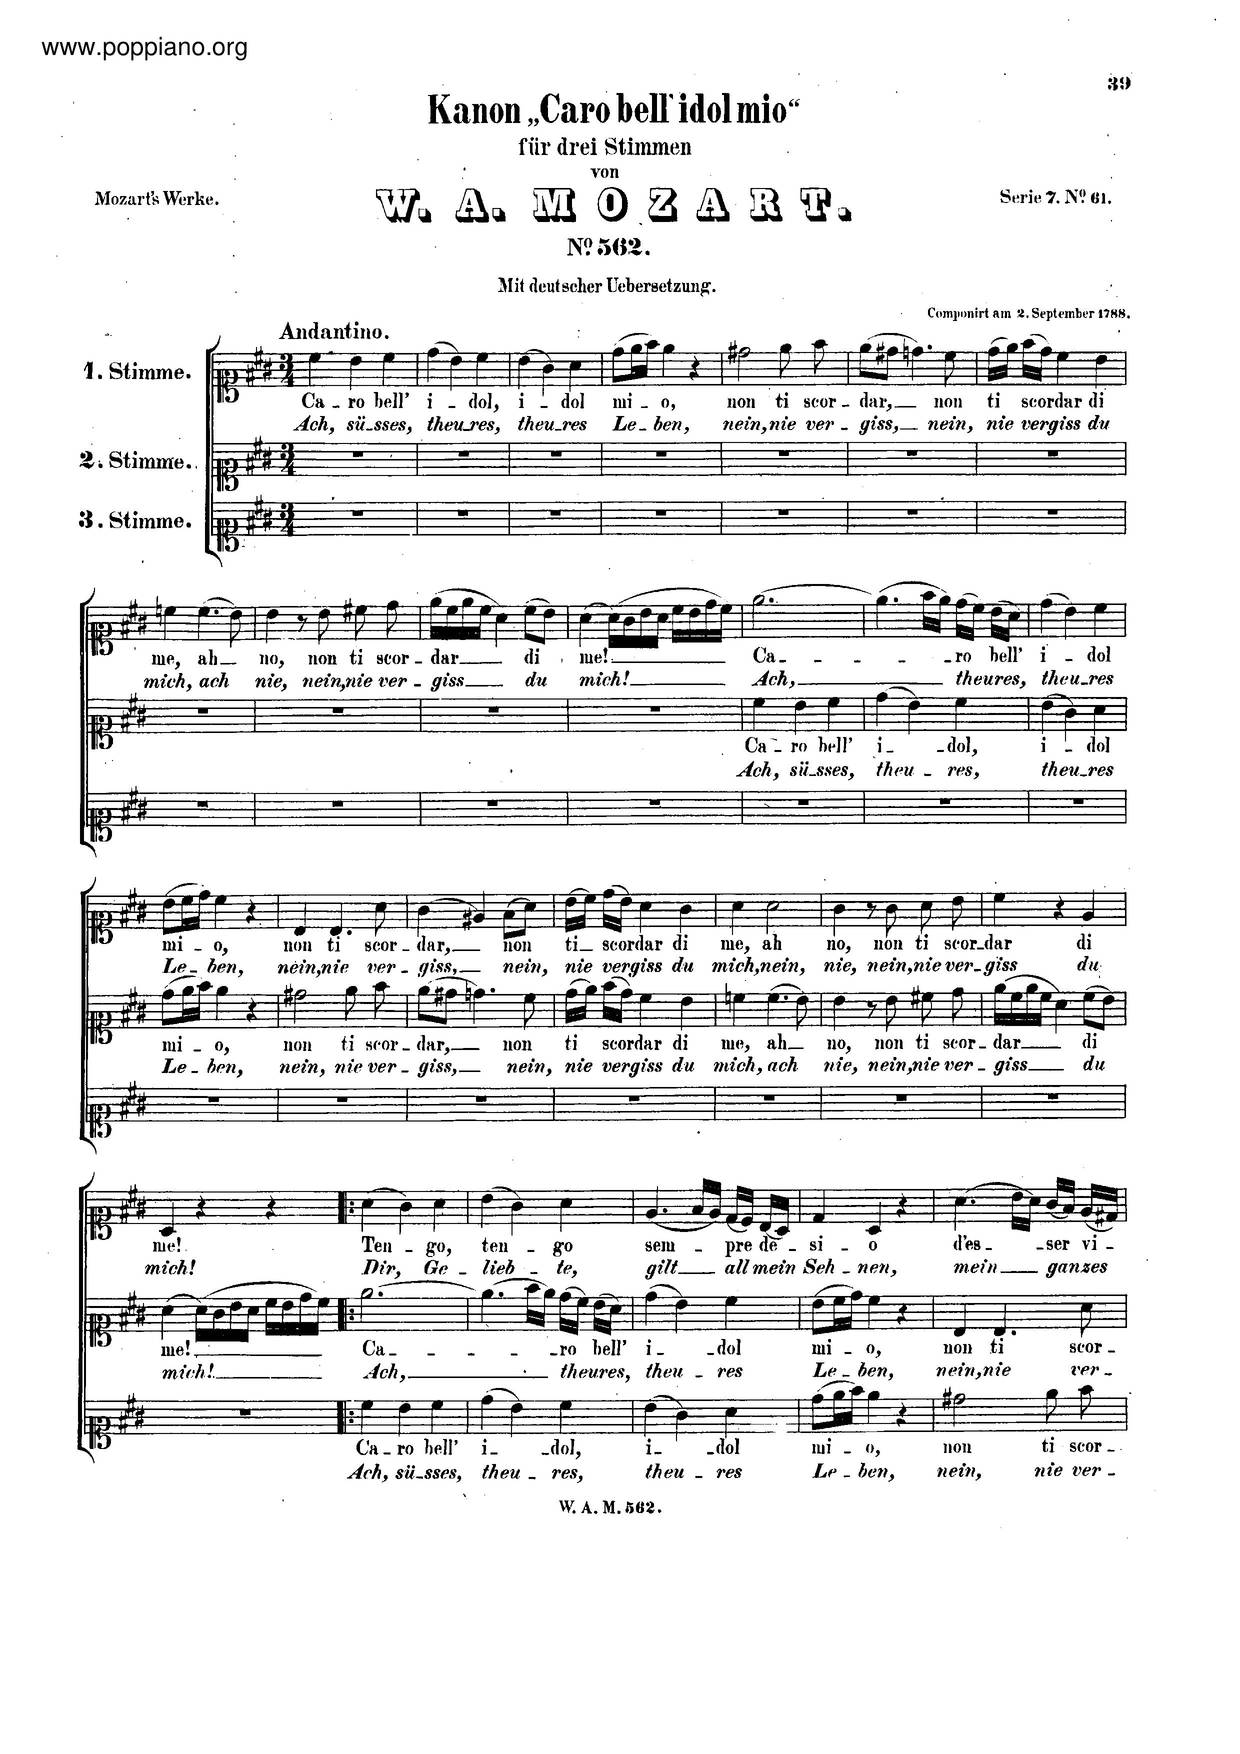 Canon For 3 Voices In A Major, K. 562琴谱